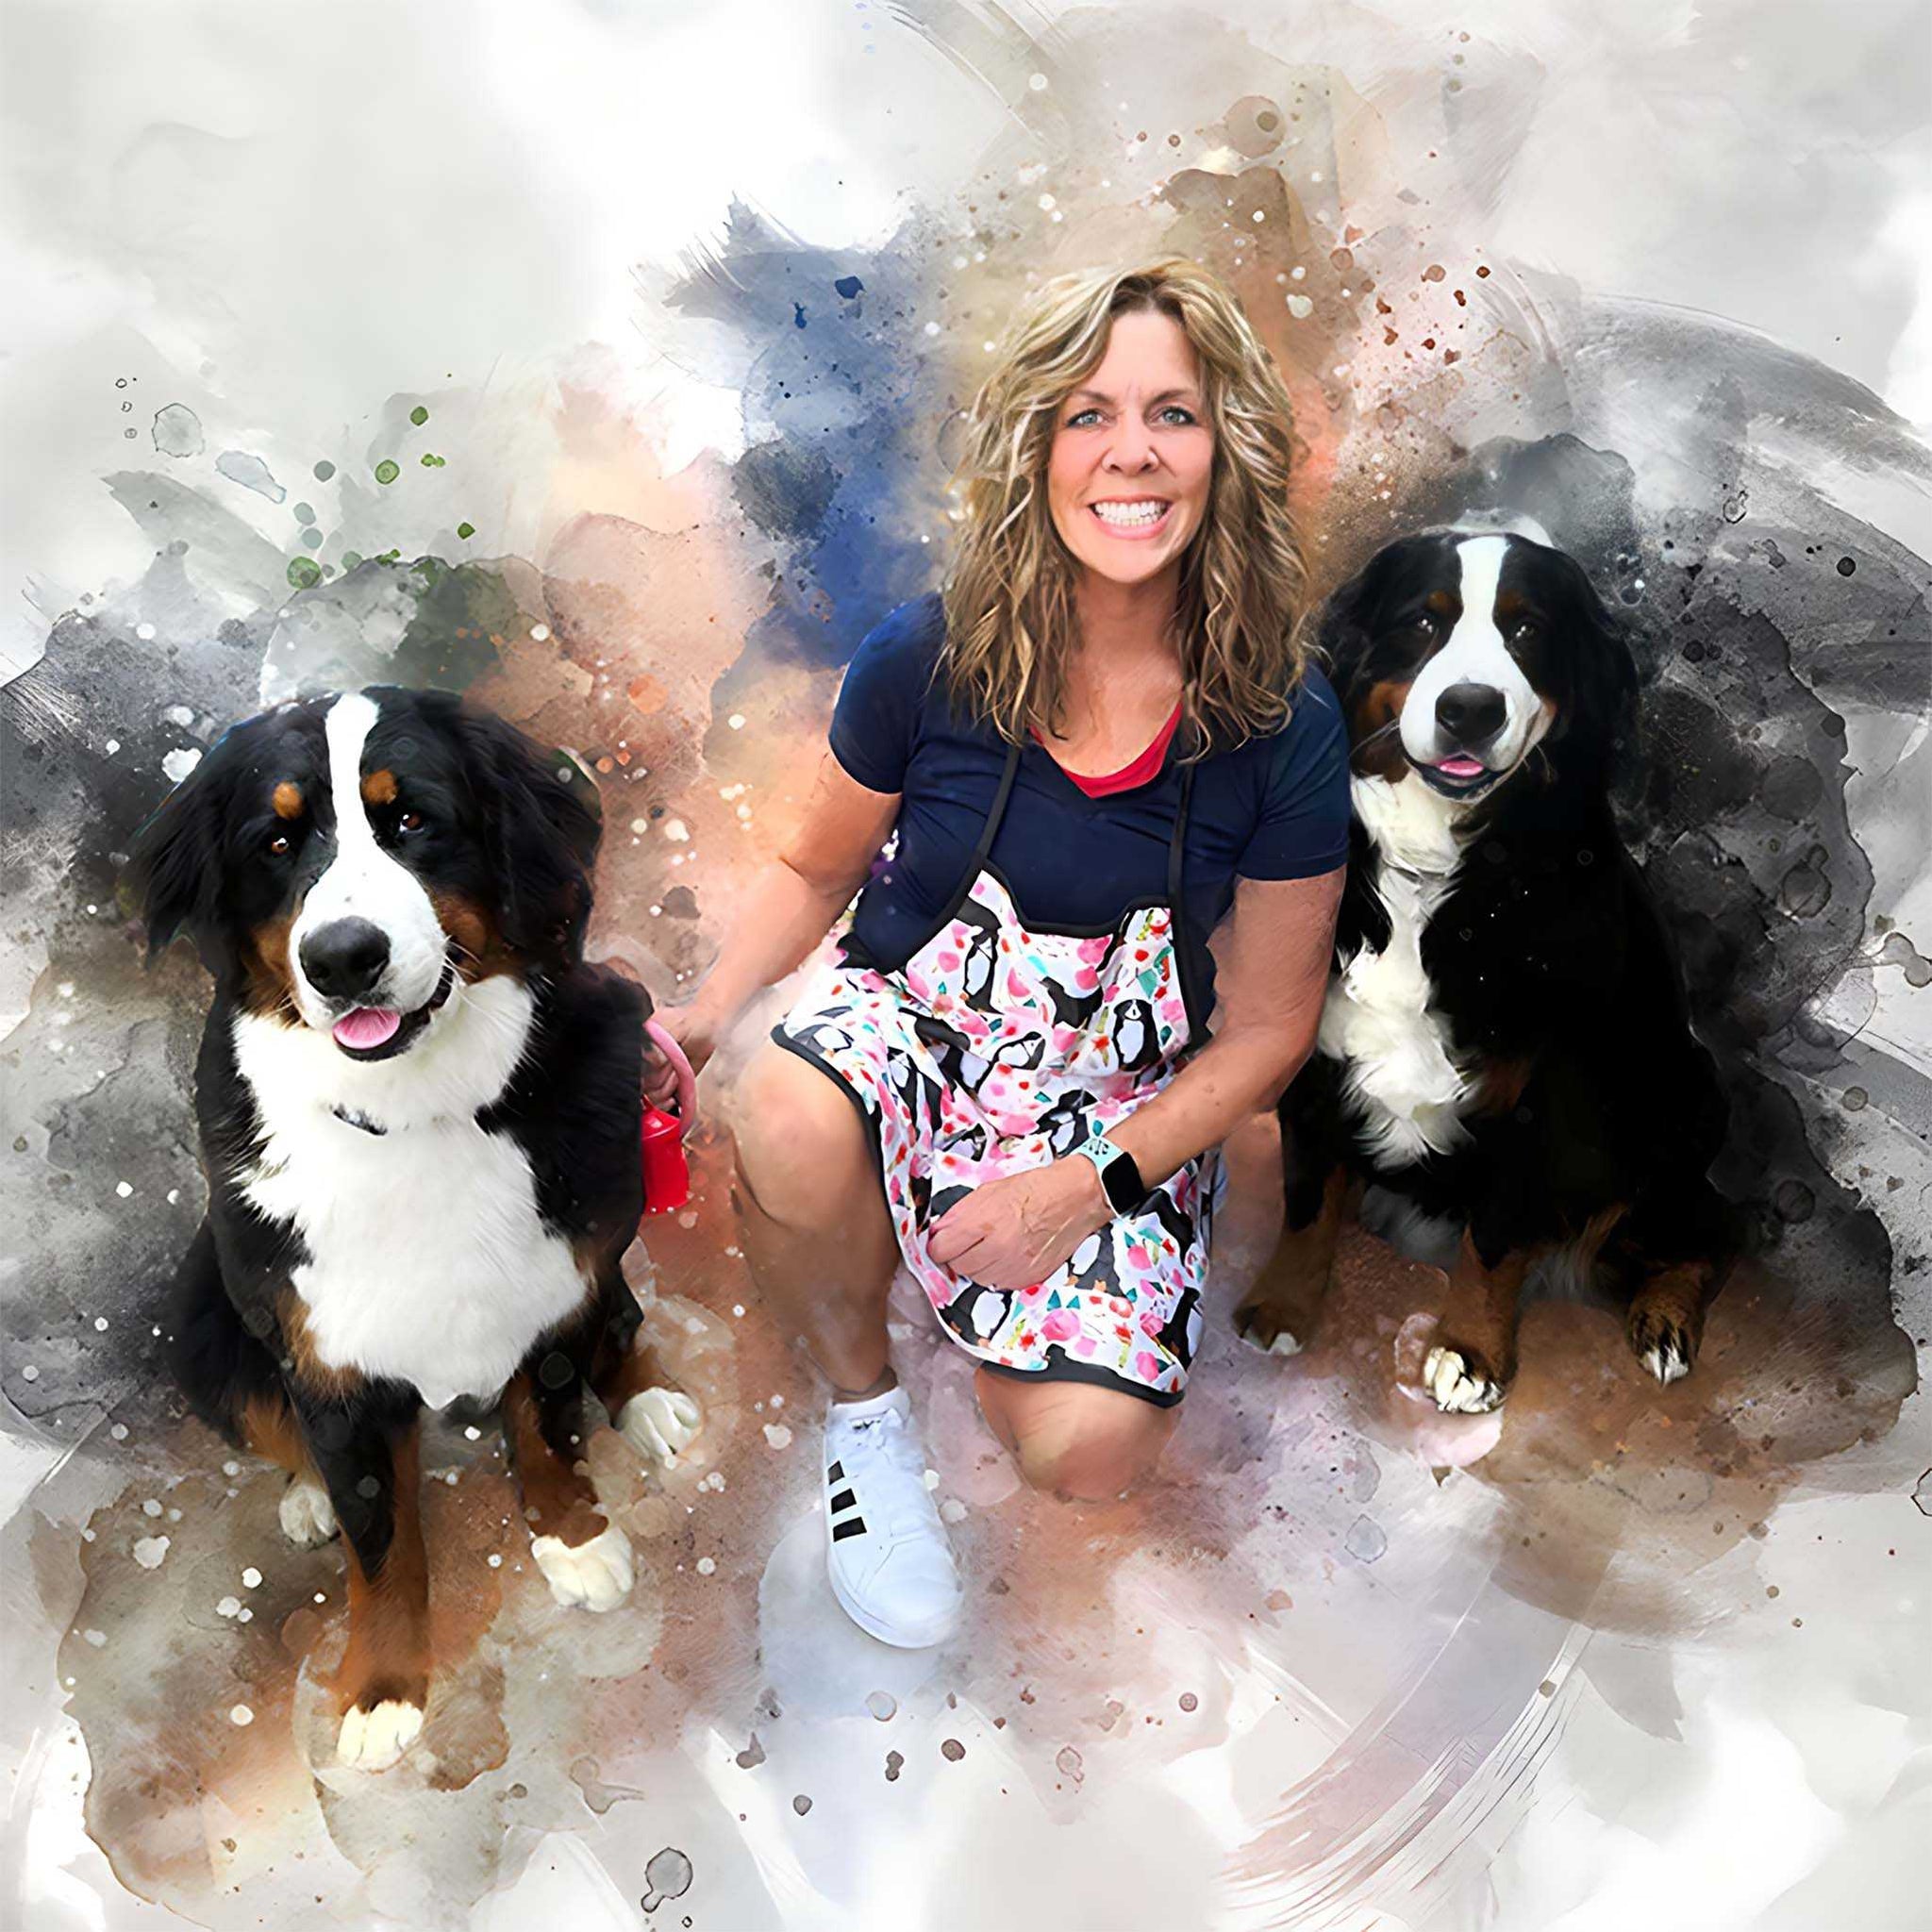 Gift for Dog Owner | Gifts for Dog Lovers | Custom Dog Portrait | Gift for New Puppy Owners - FromPicToArt